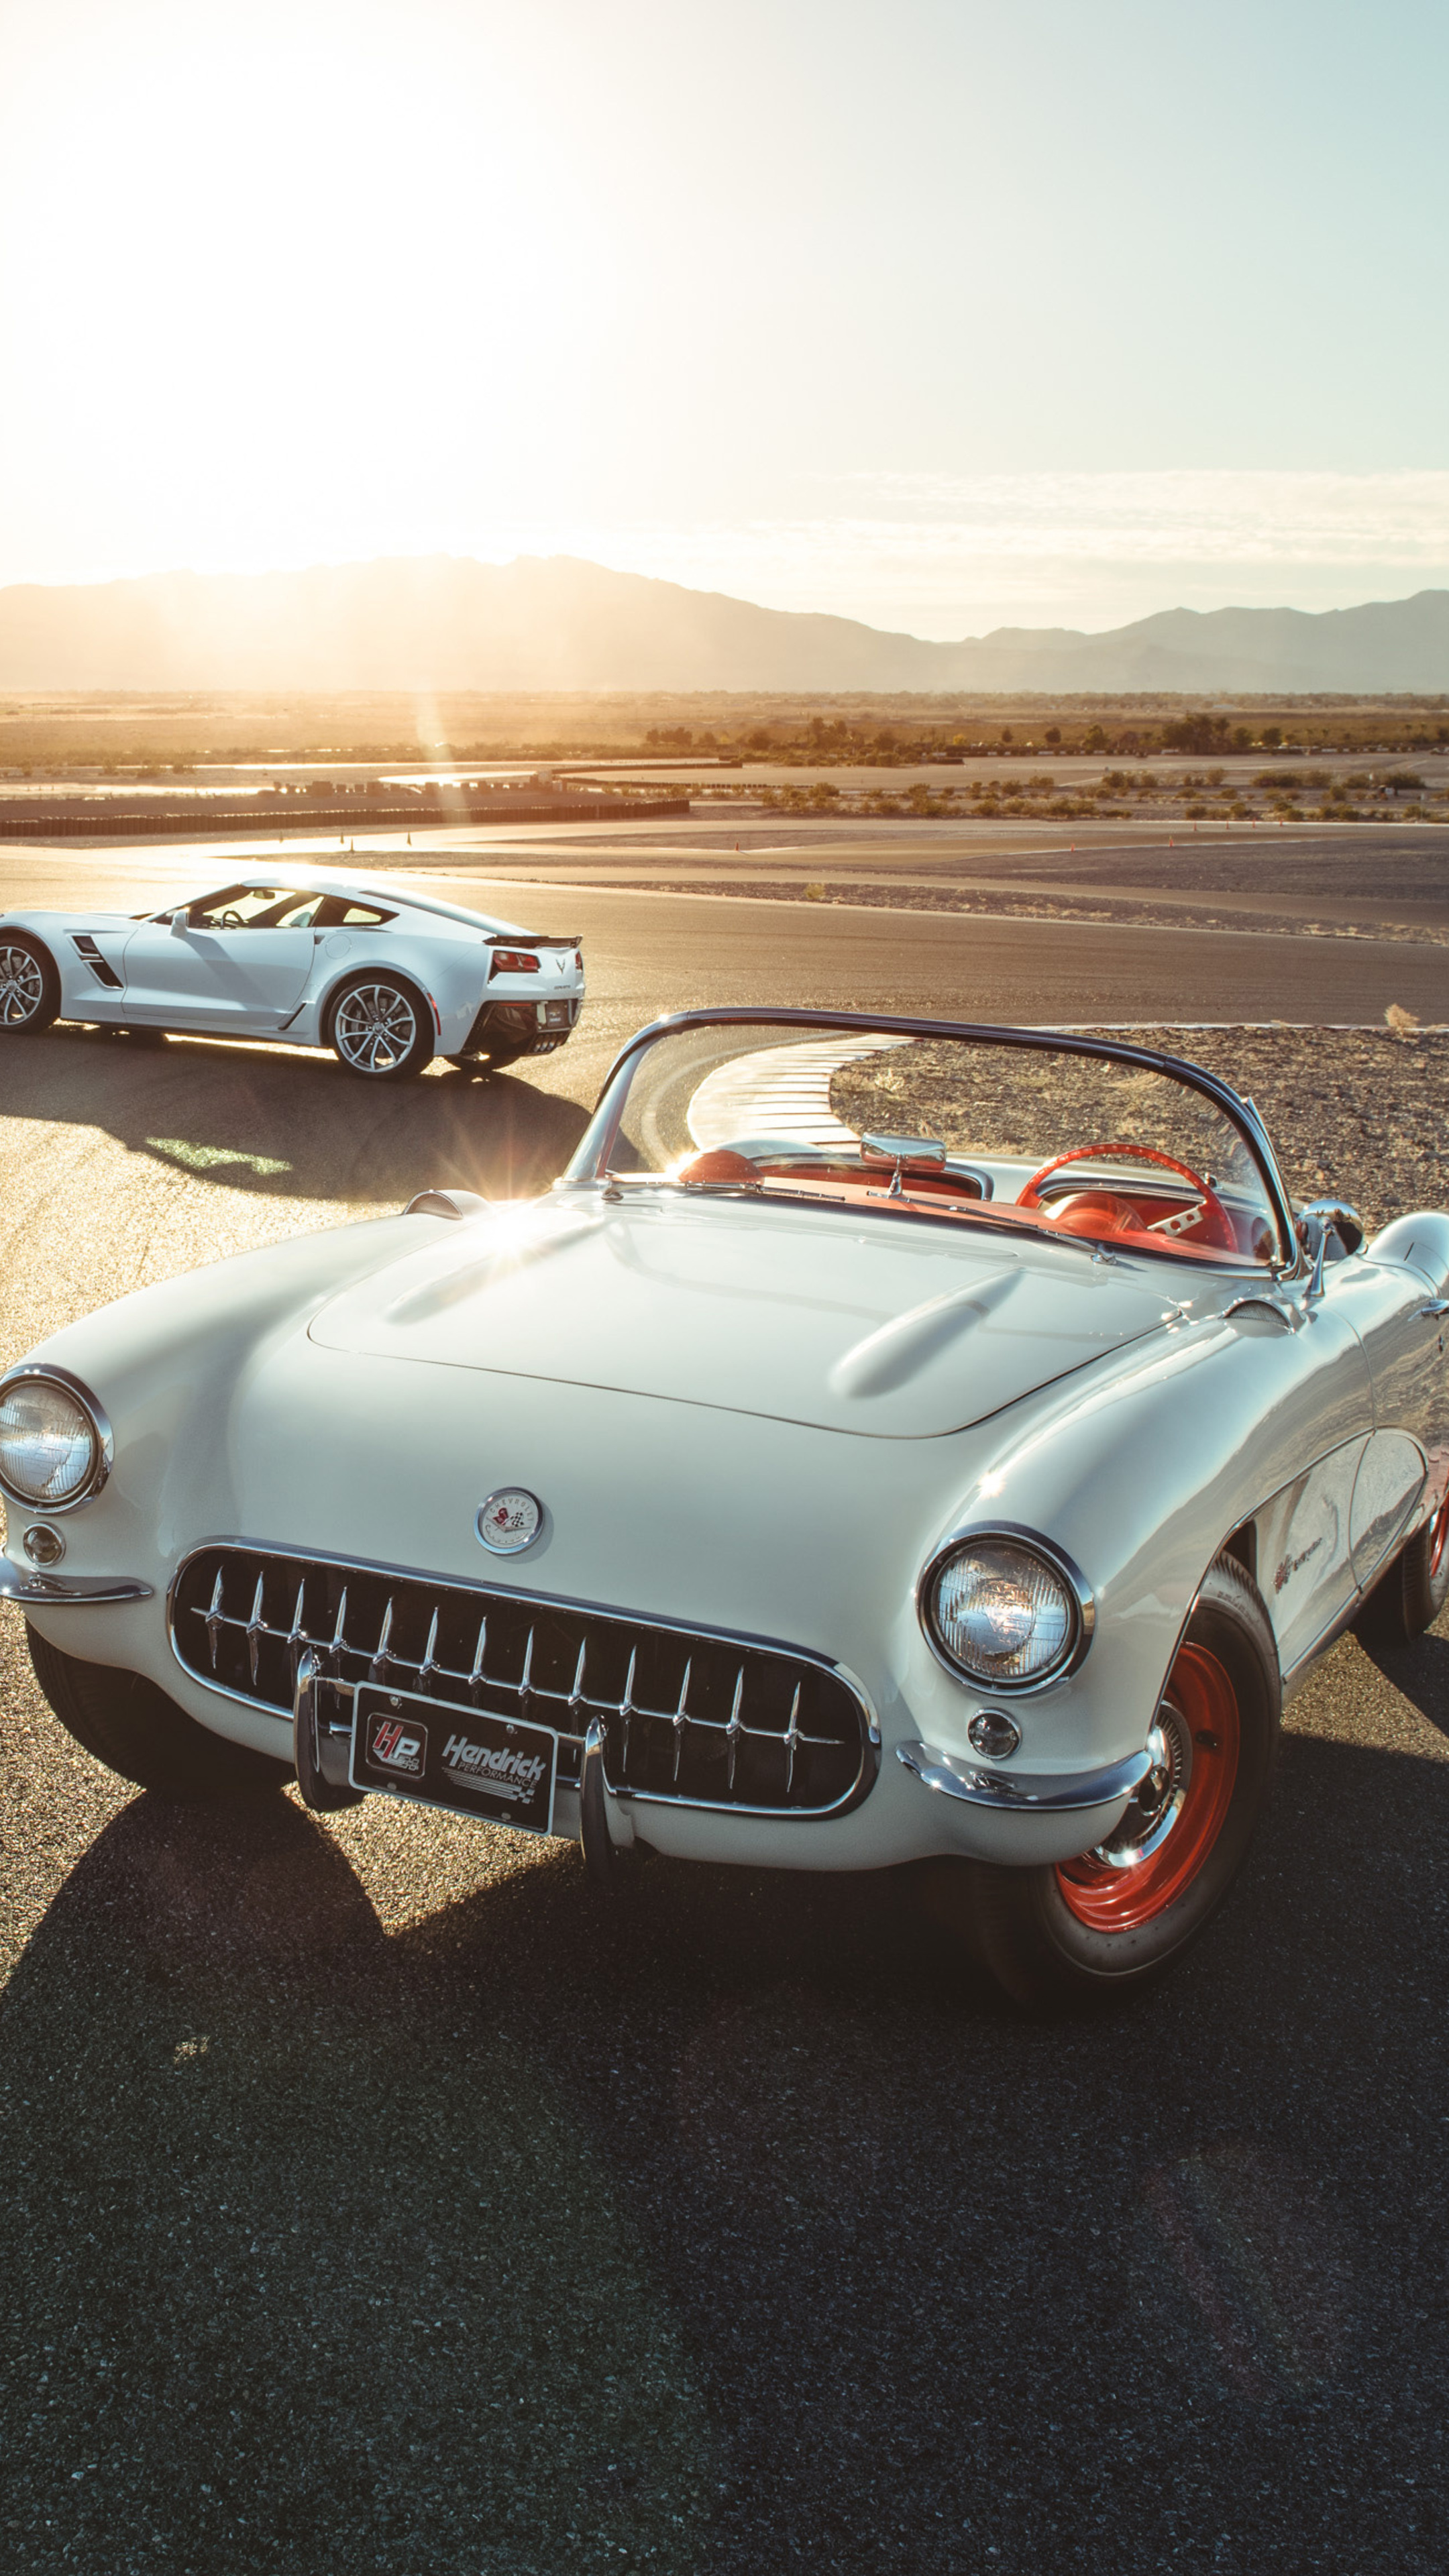 Corvette: A vintage model of 1953 near the latest ZR1 model of 2019, An American sports car with a long history. 2160x3840 4K Wallpaper.